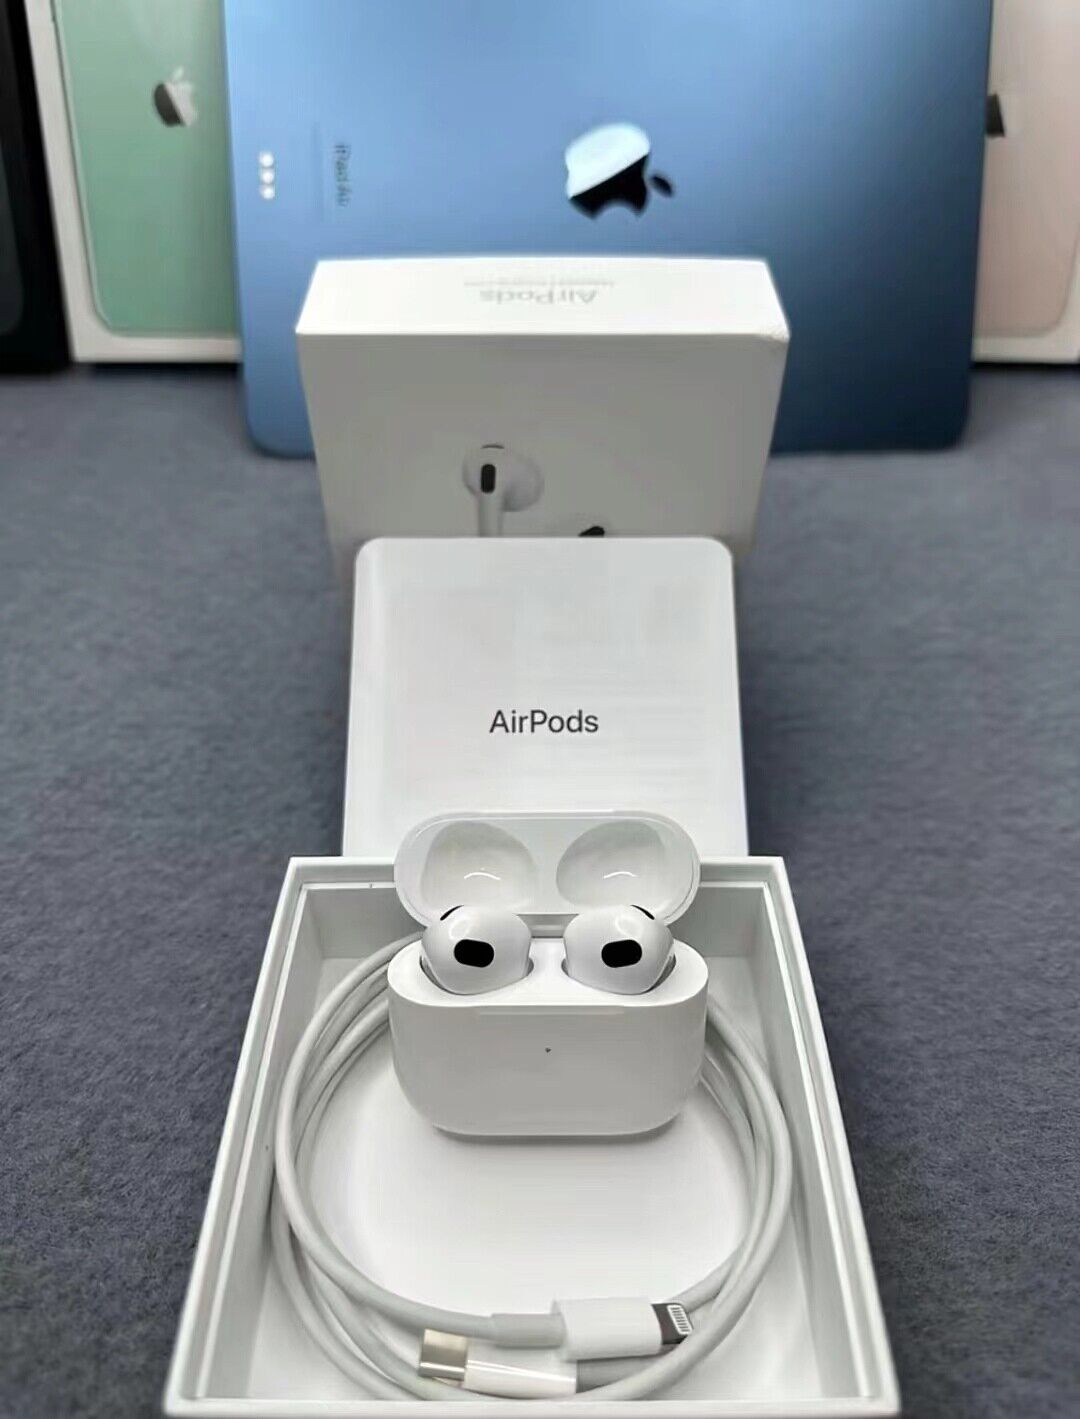 Apple Airpods 3rd Generation Bluetooth Earbuds Earphone Headset Charging Case